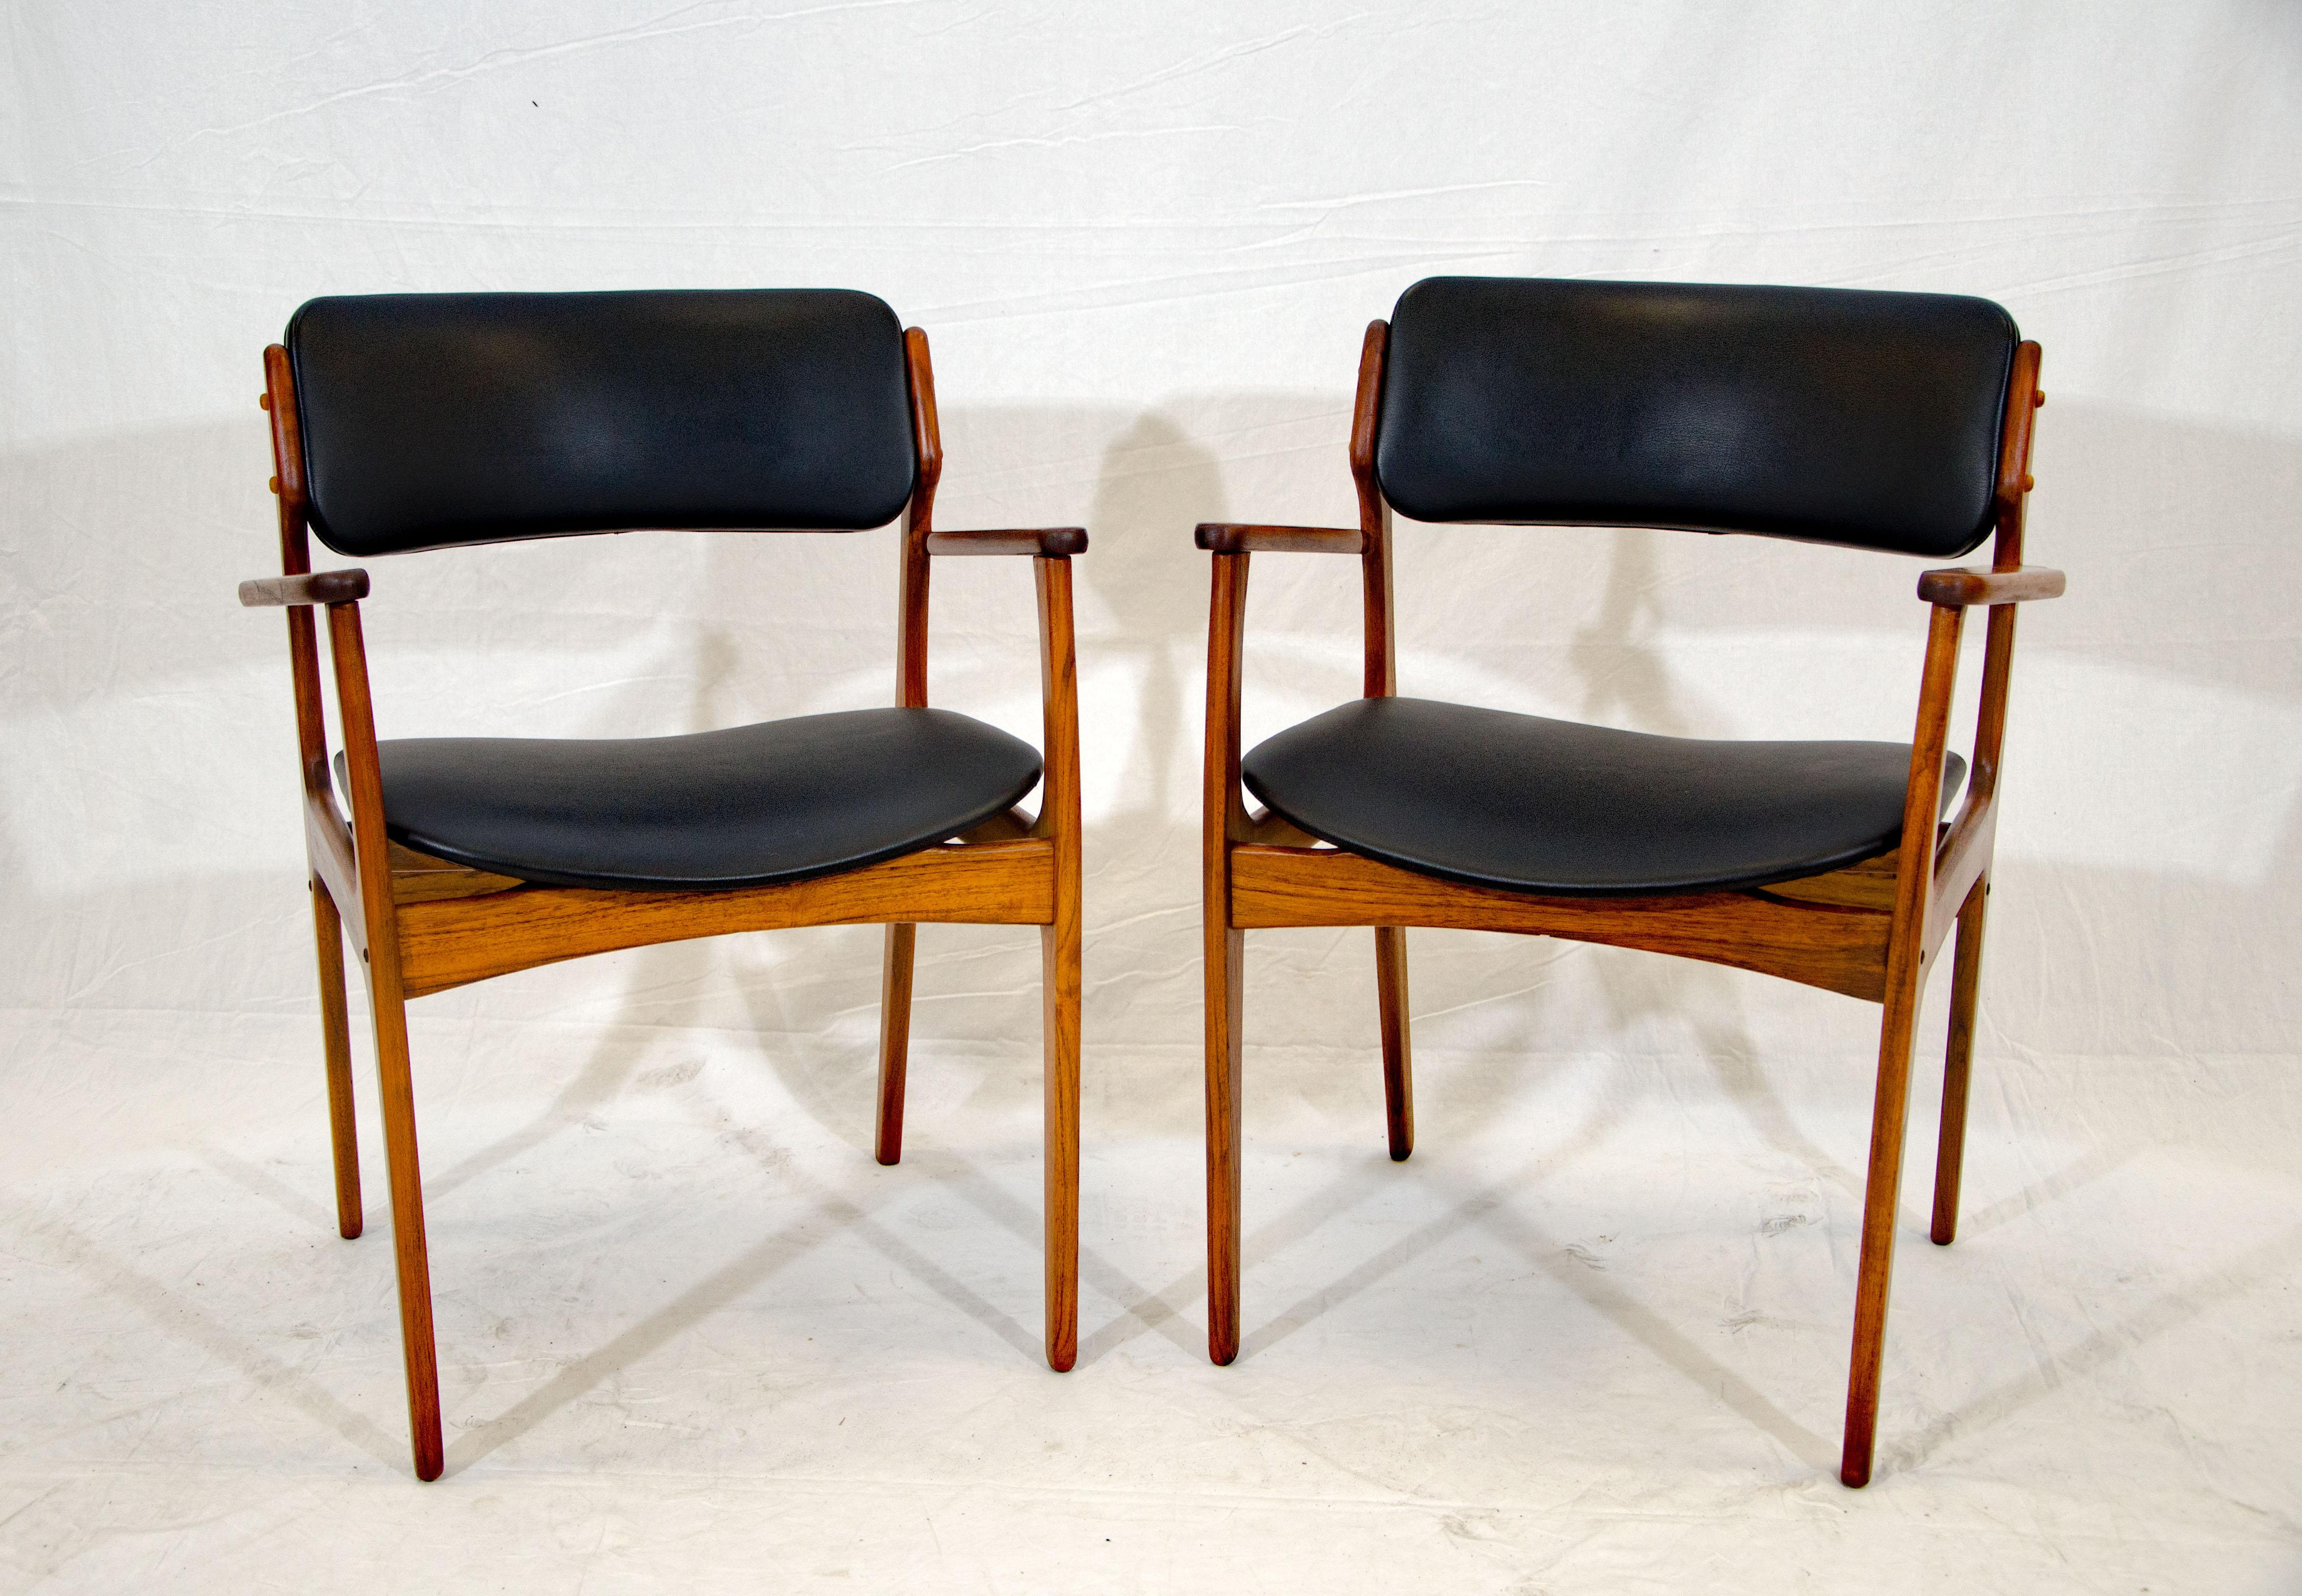 This iconic pair of armchairs designed by Erik Buck (Buch) would be very comfortable home office seating, as well as added guest seating around a dining table. They are very comfortable with padded backs and wide seats.